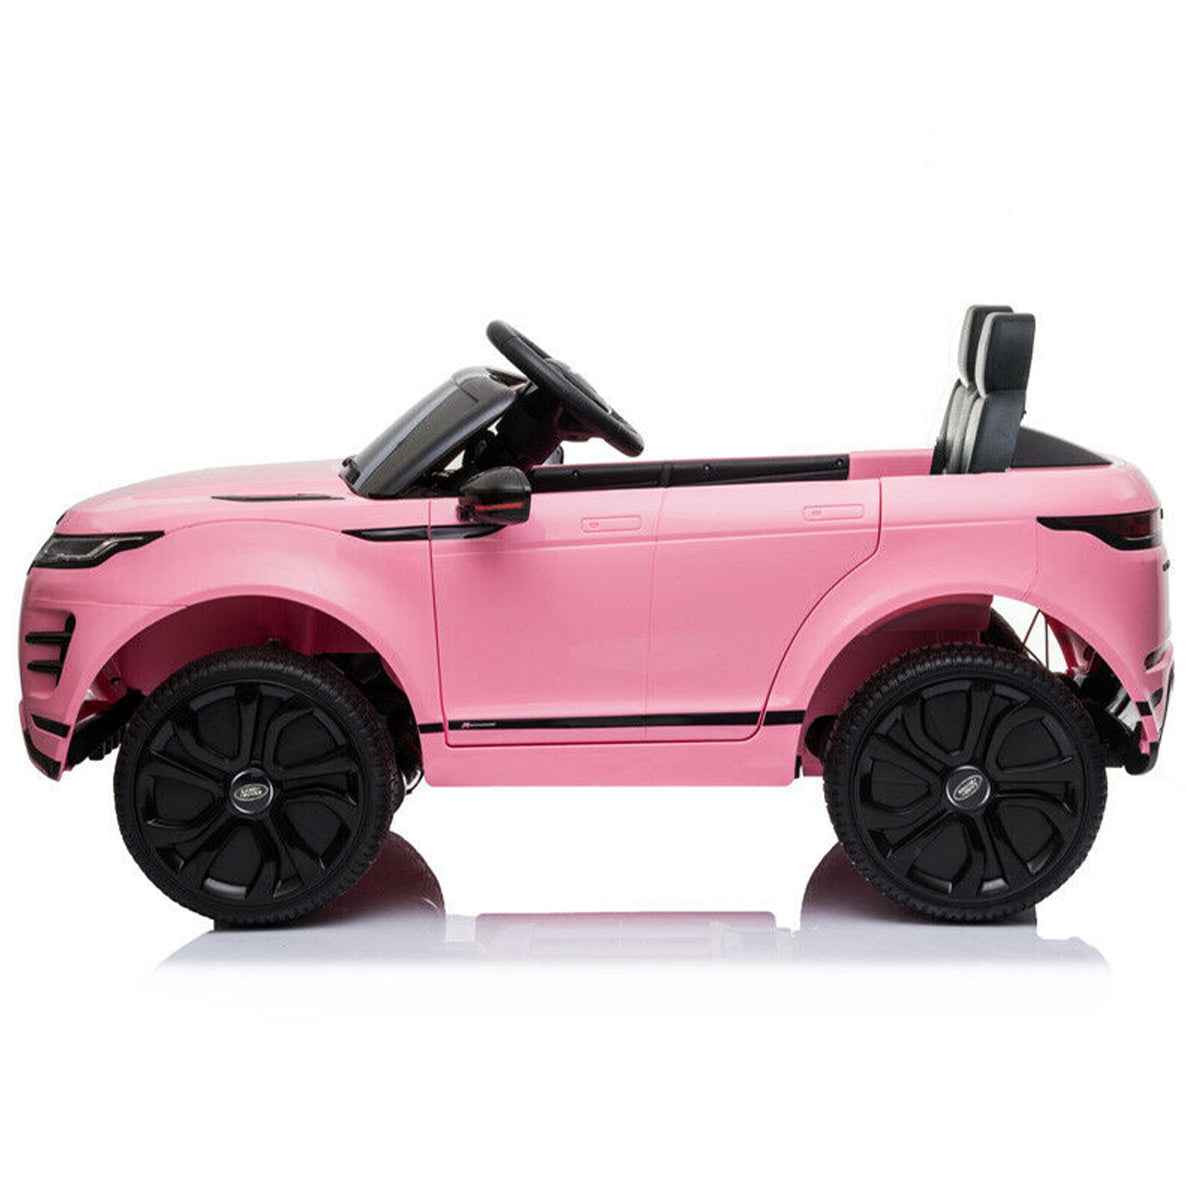 Land Rover Licensed Kids Electric Ride On Car Remote Control - Pink